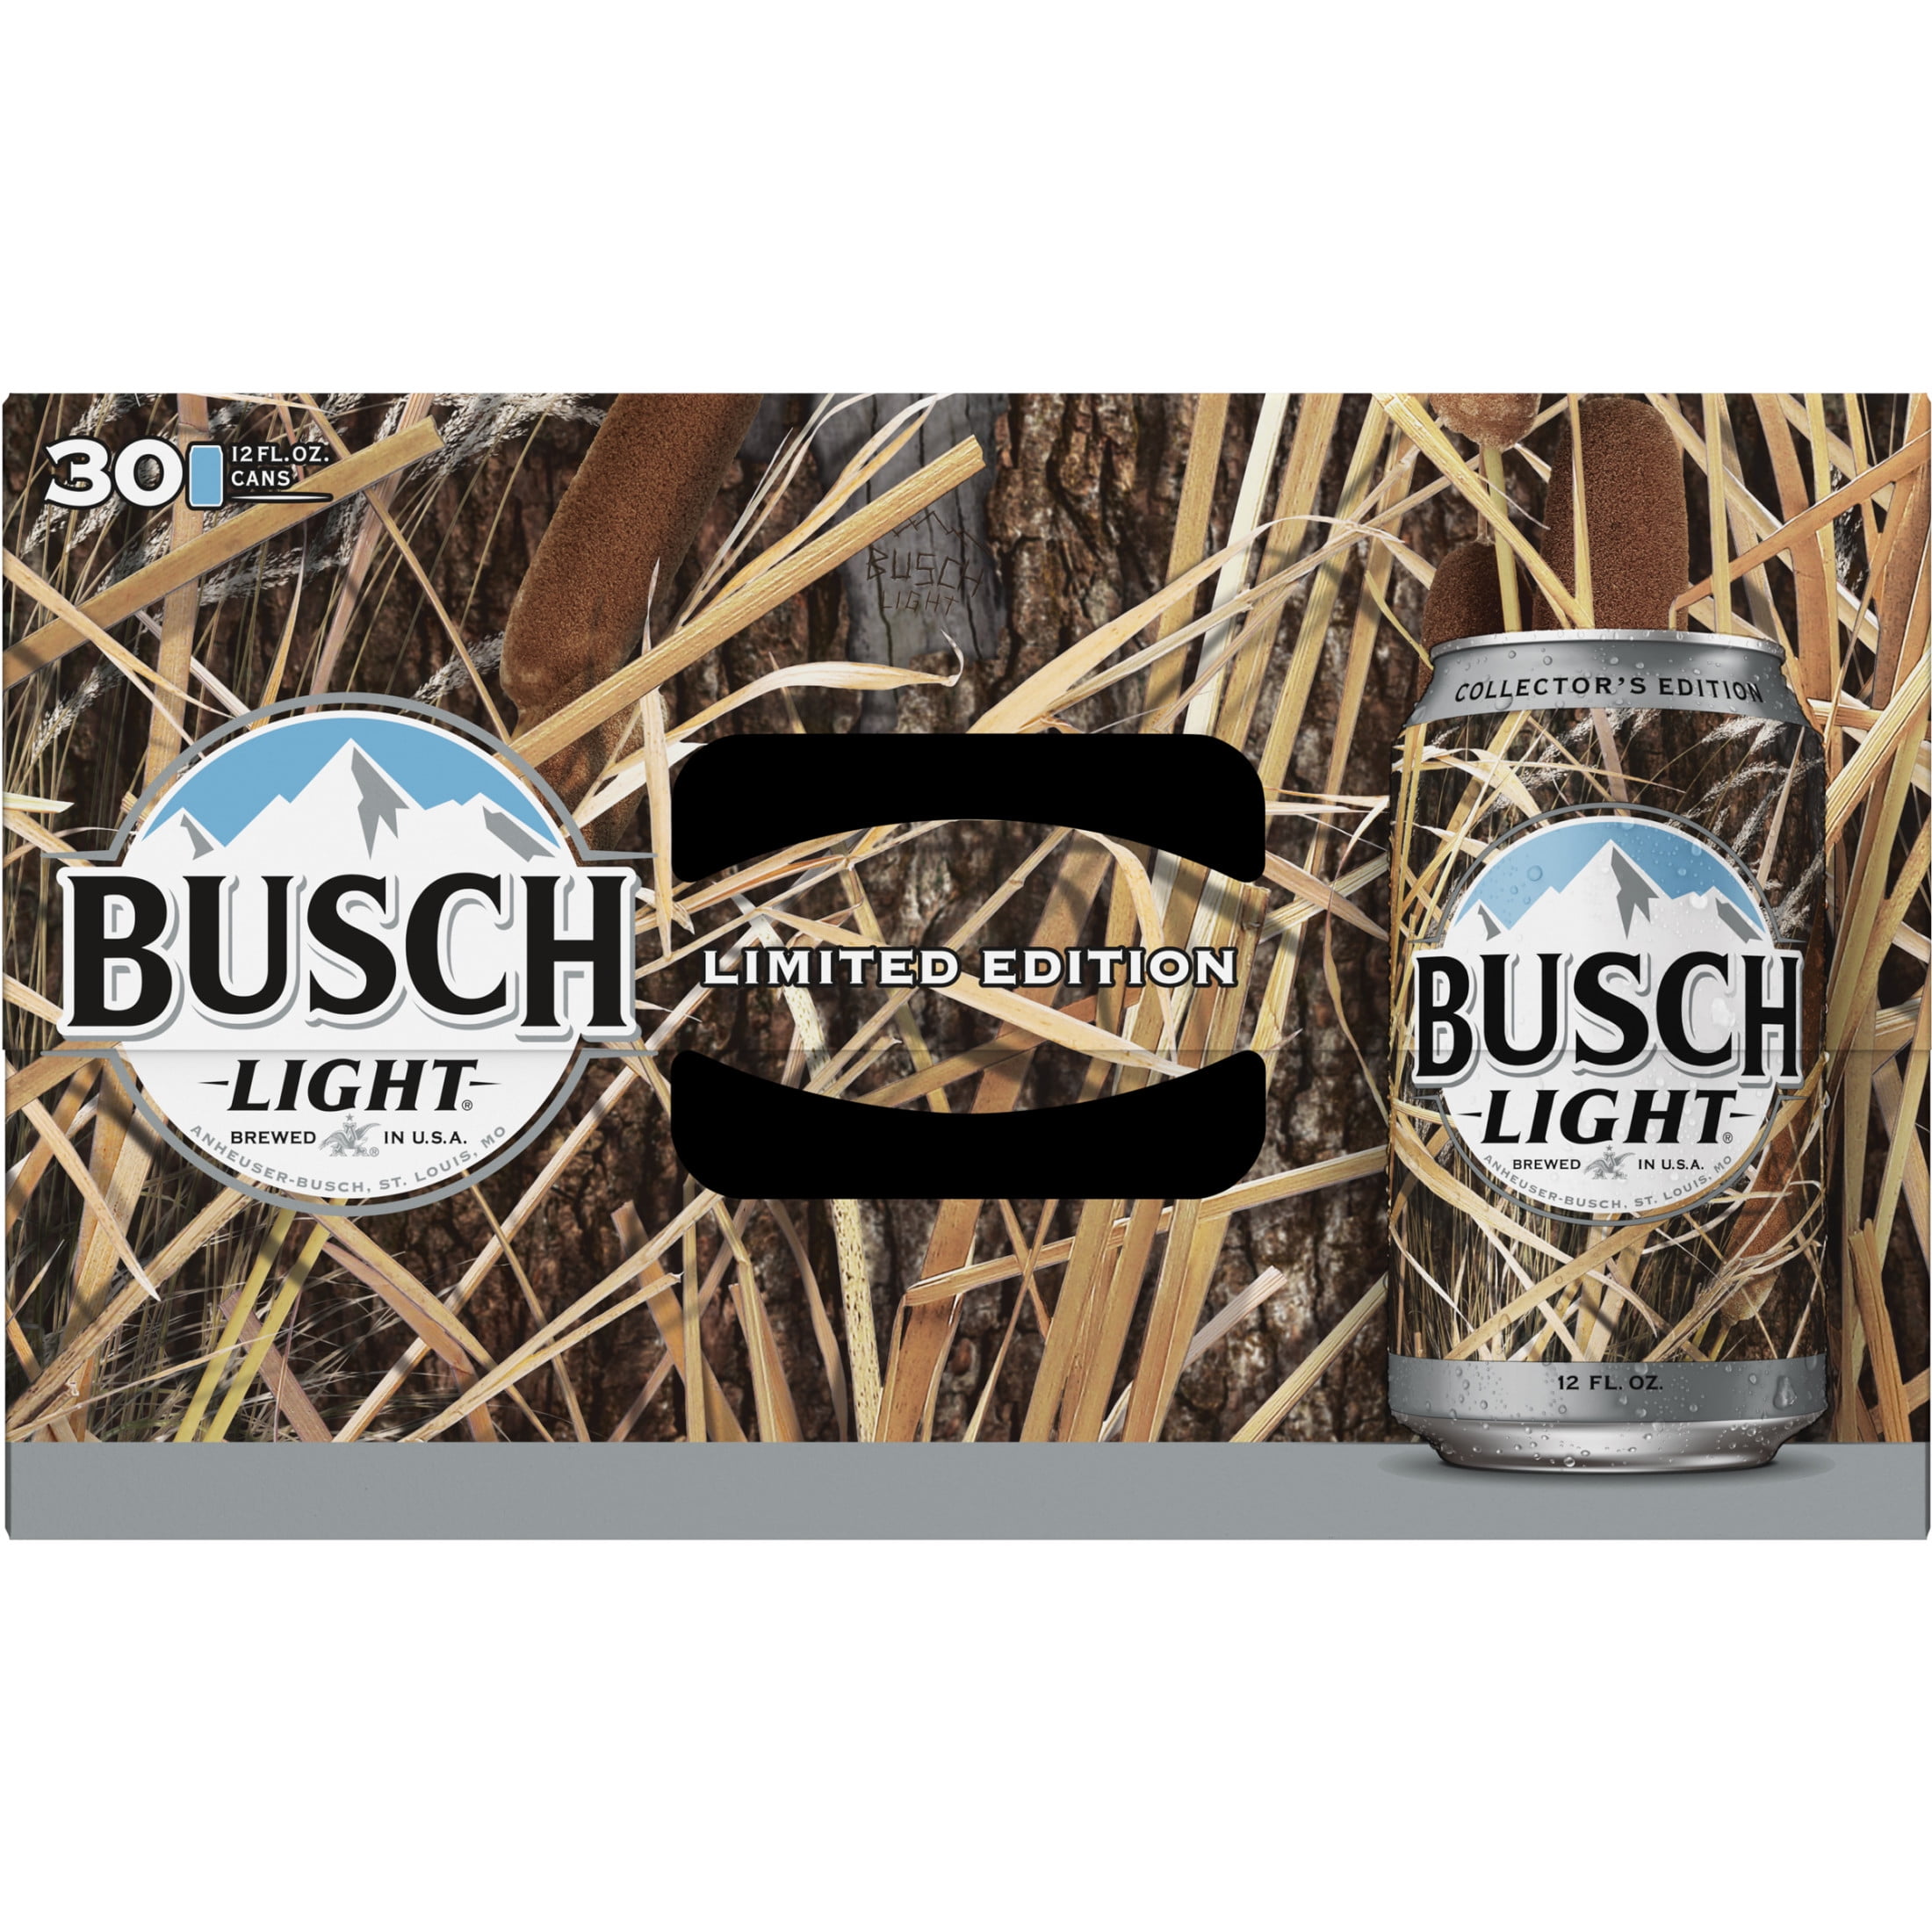 Busch Light Lager Domestic Beer 30 Pack